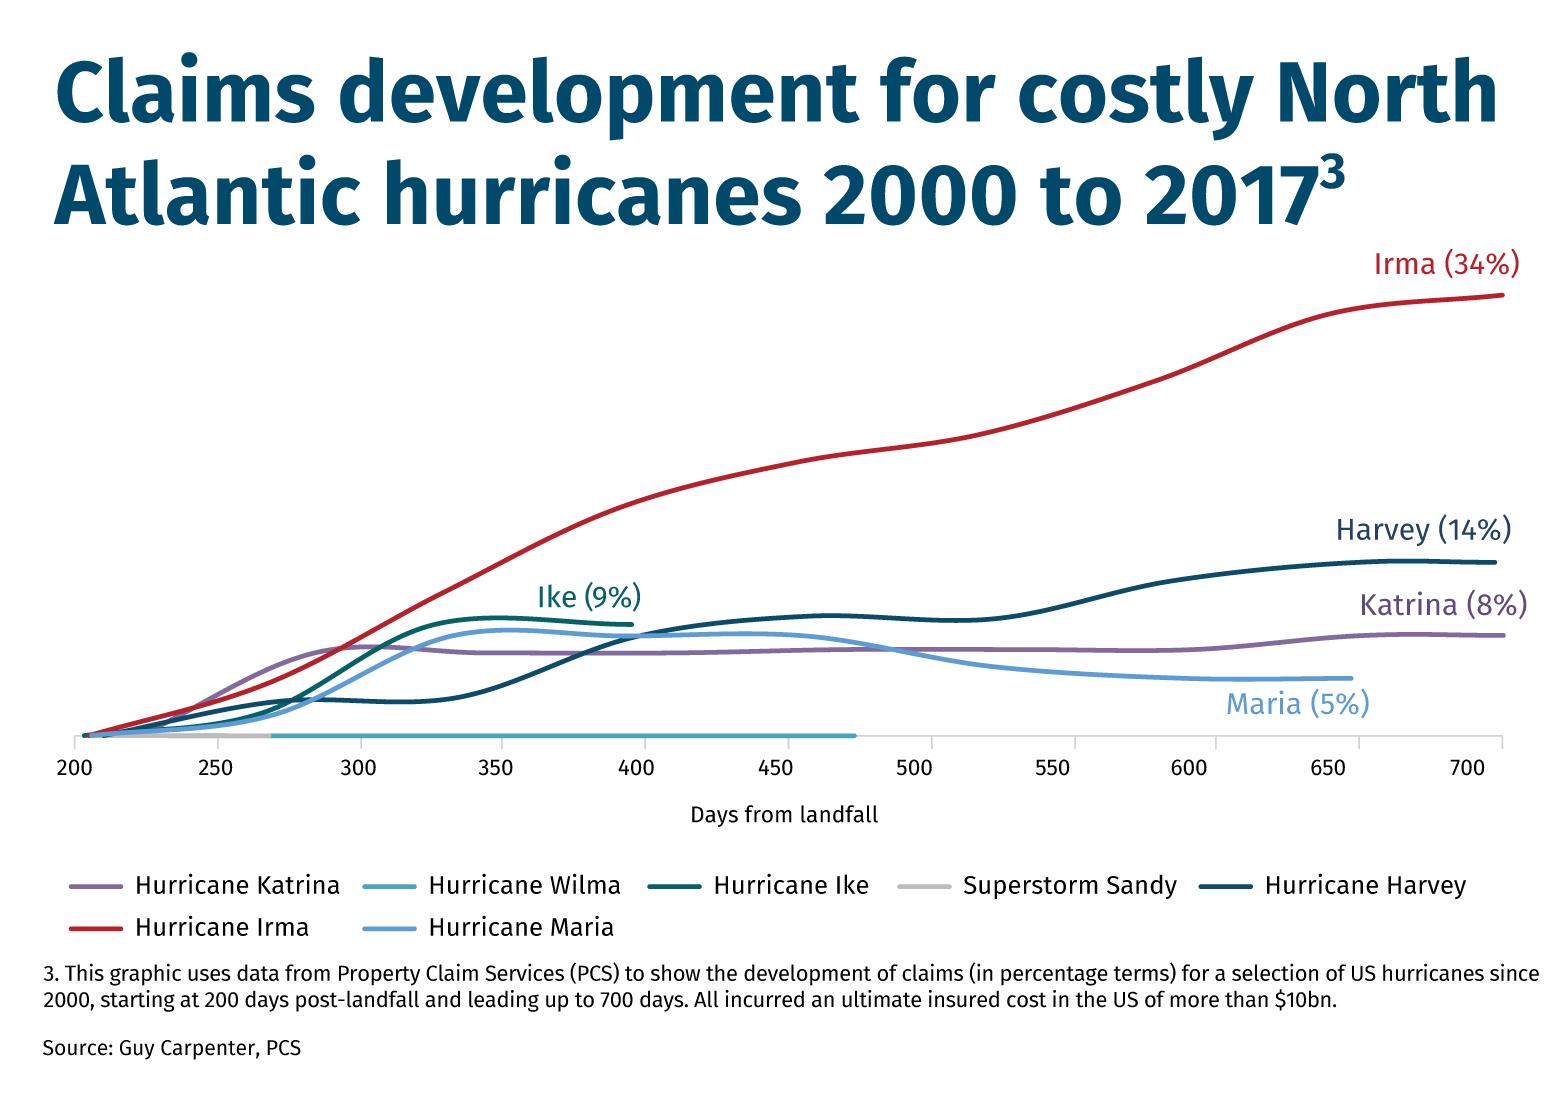 Claims-development-for-costly-NorthAtlantic-hurricanes-2000-to-2017